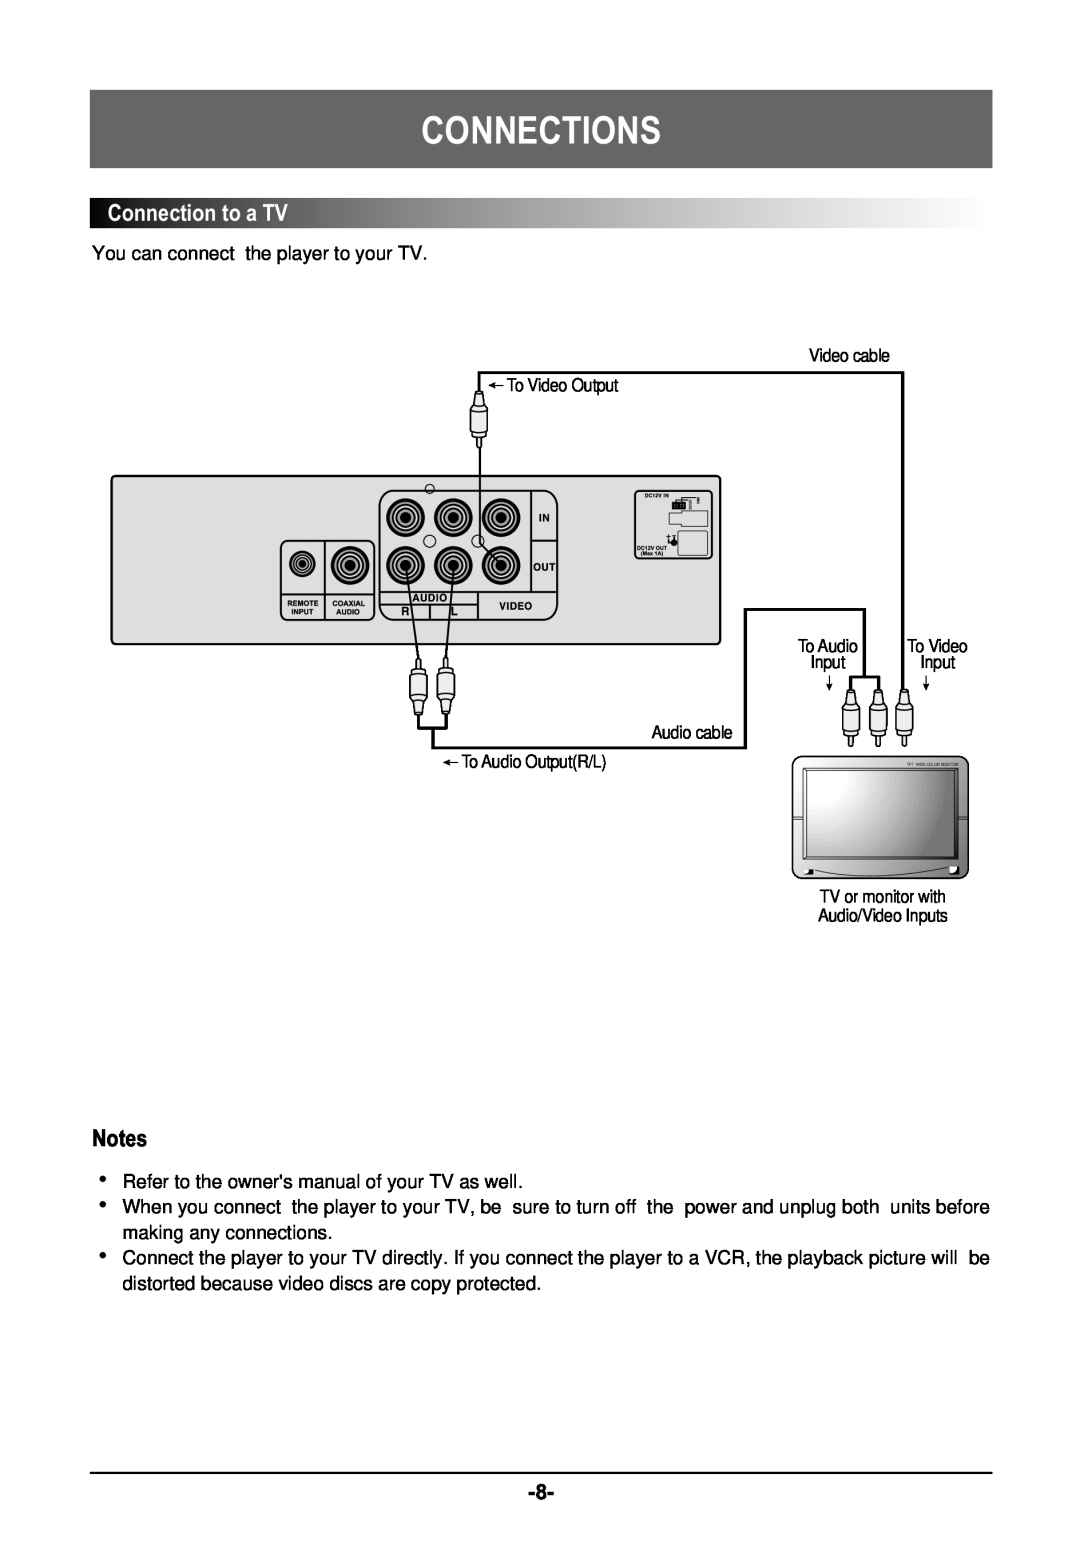 Farenheit Technologies DVD-19 owner manual Connections, ConnectiontoaTV 